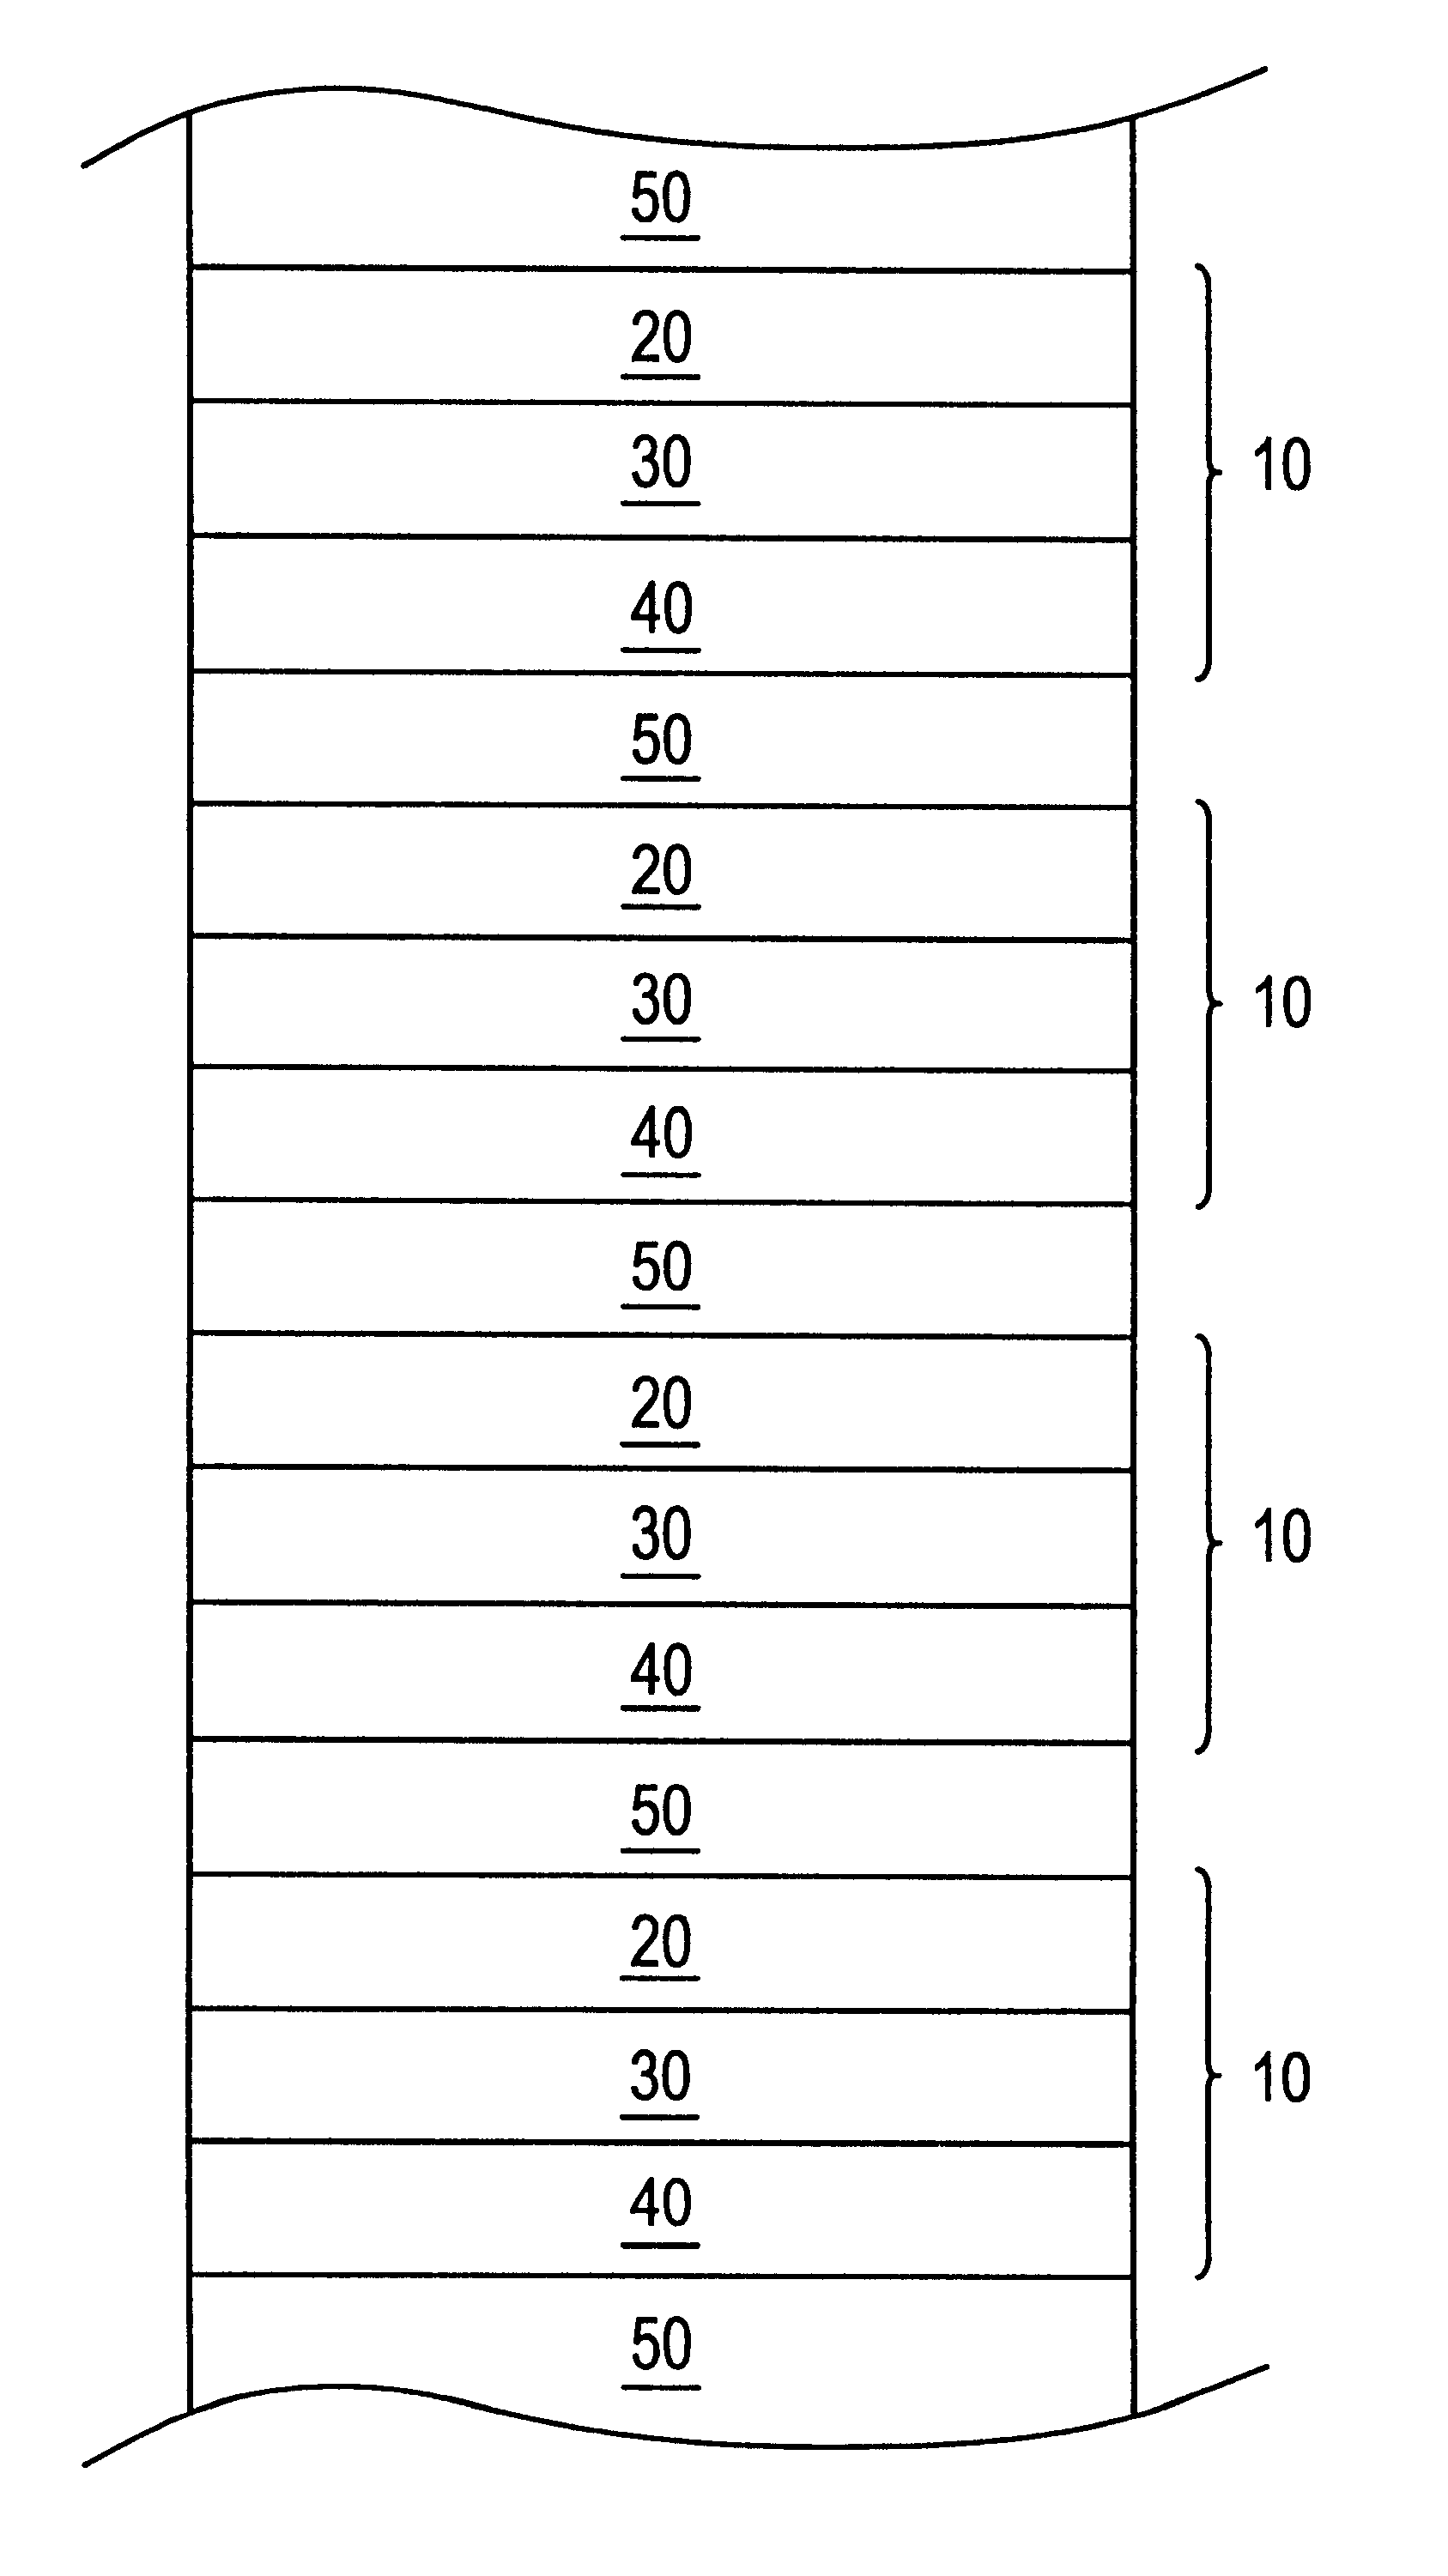 Consinterable ceramic interconnect for solid oxide fuel cells